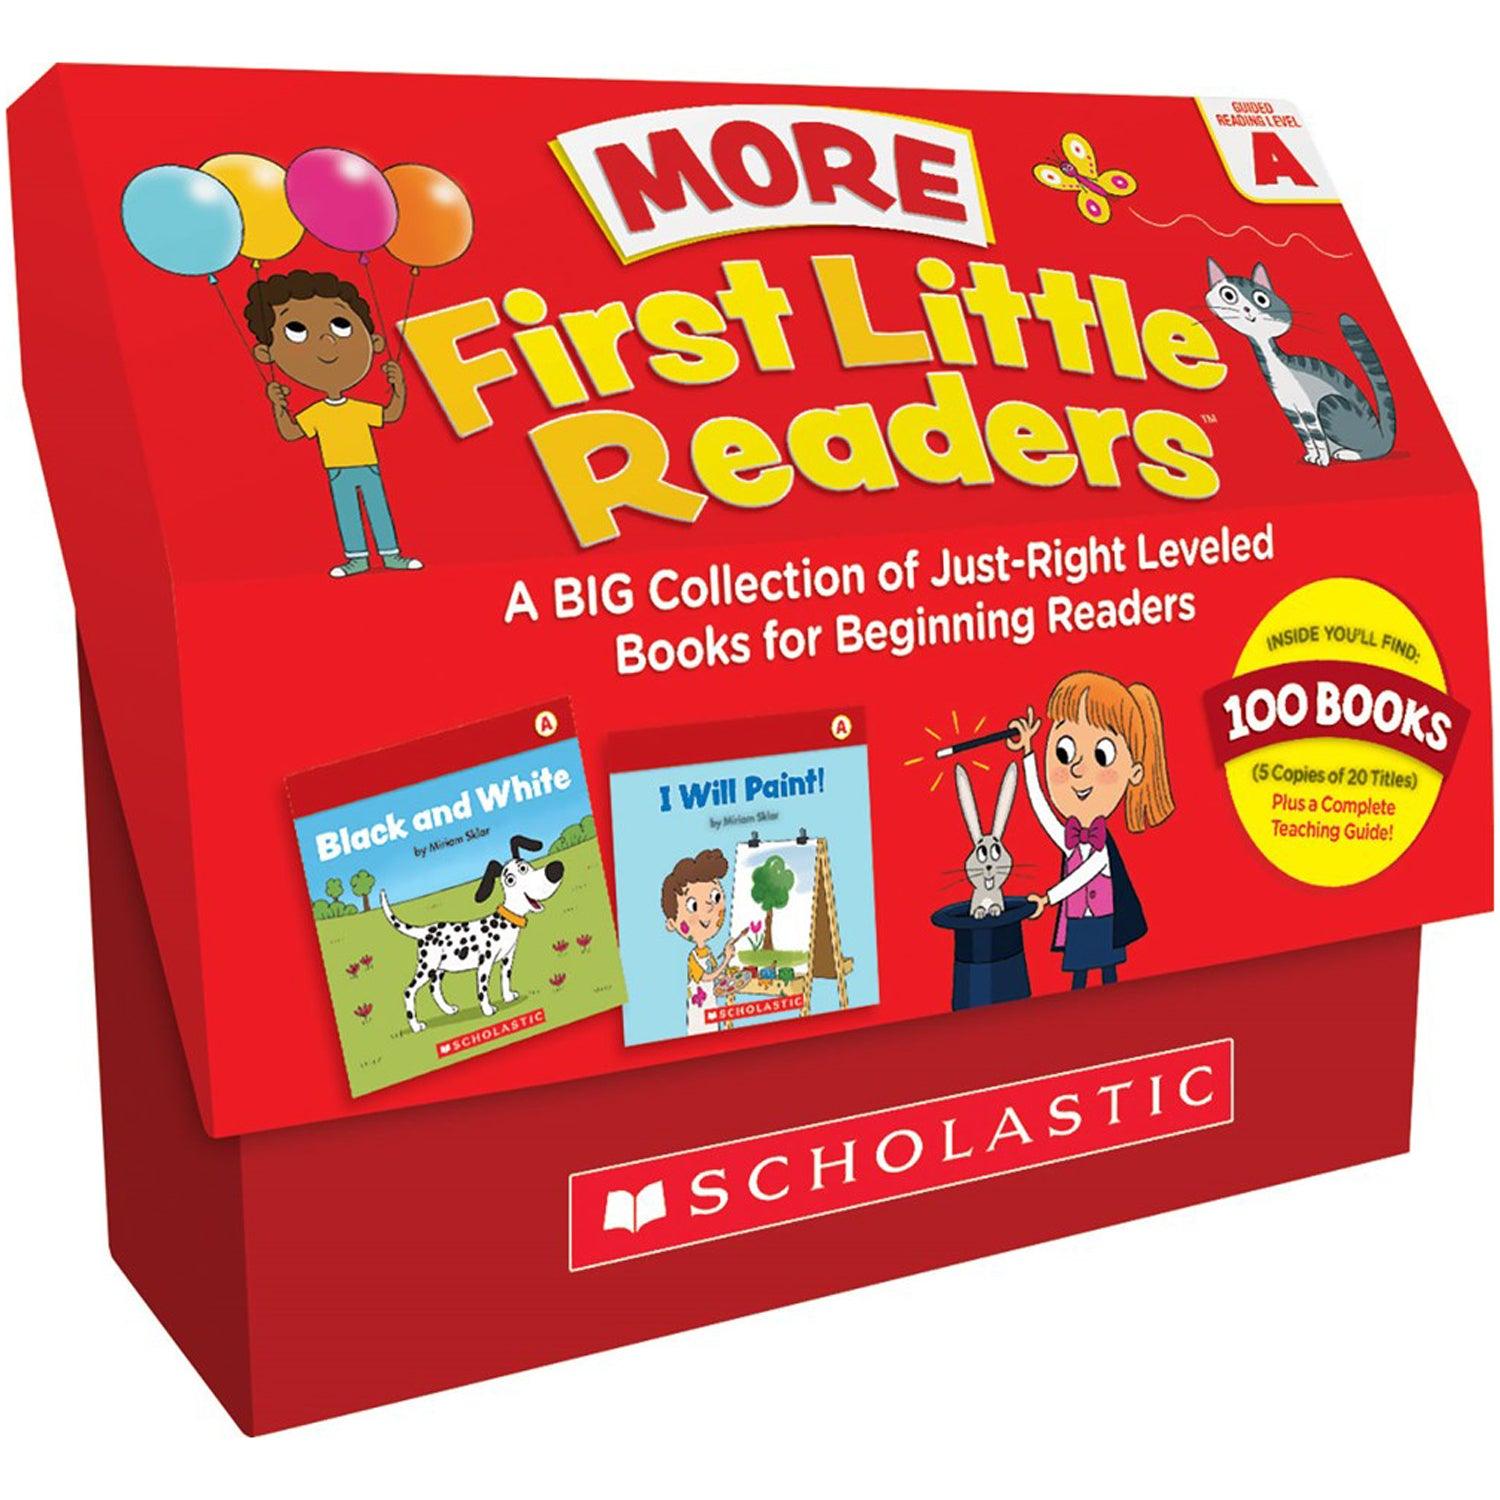 First Little Readers: More Guided Reading Level A Books (Classroom Set) - Loomini